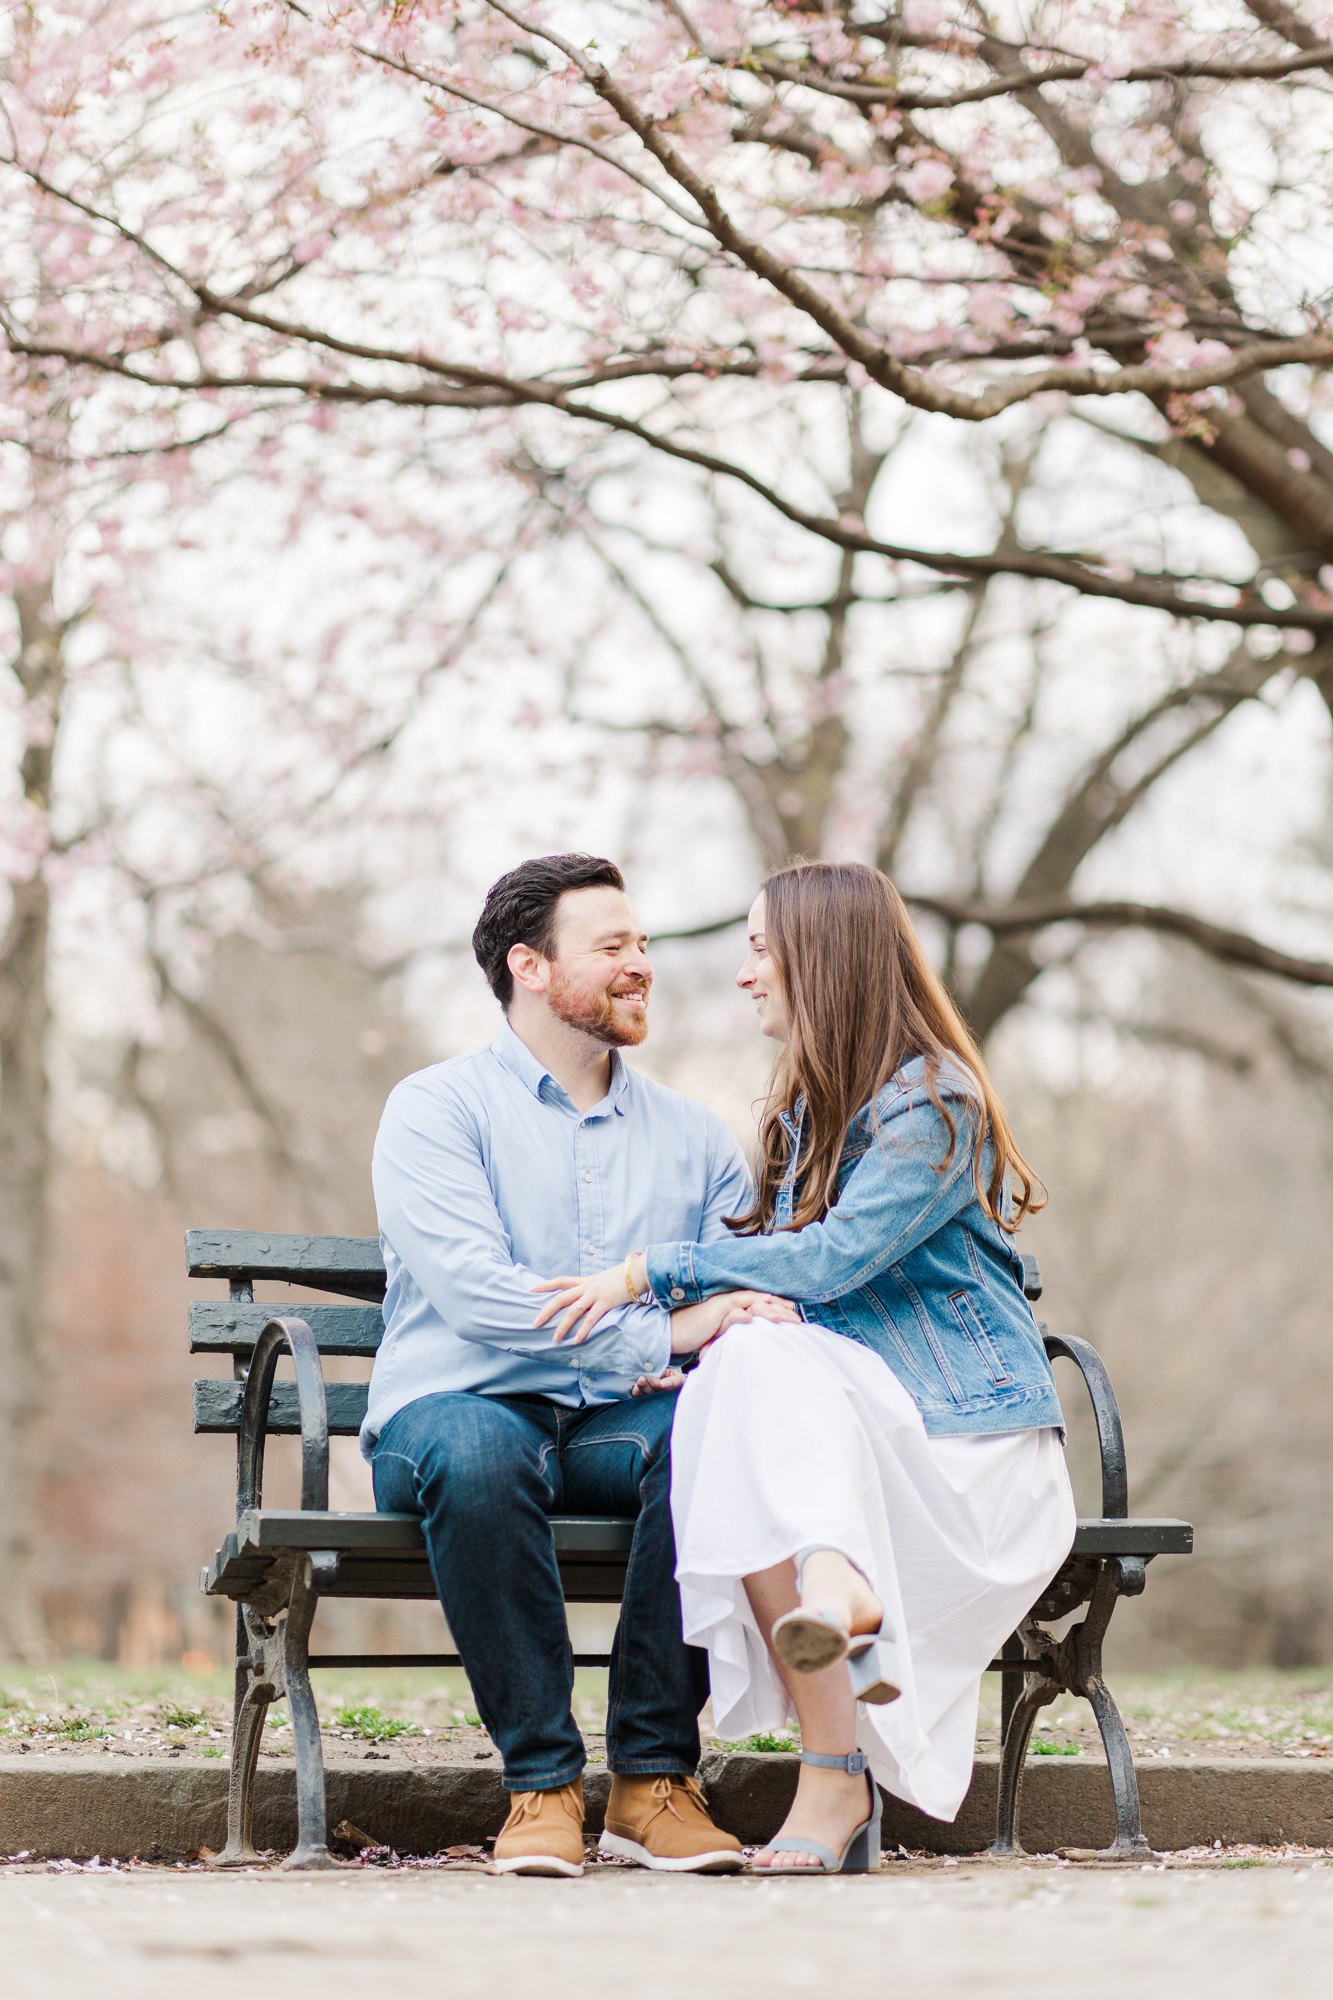 Timeless Boathouse Engagement Photos In Prospect Park